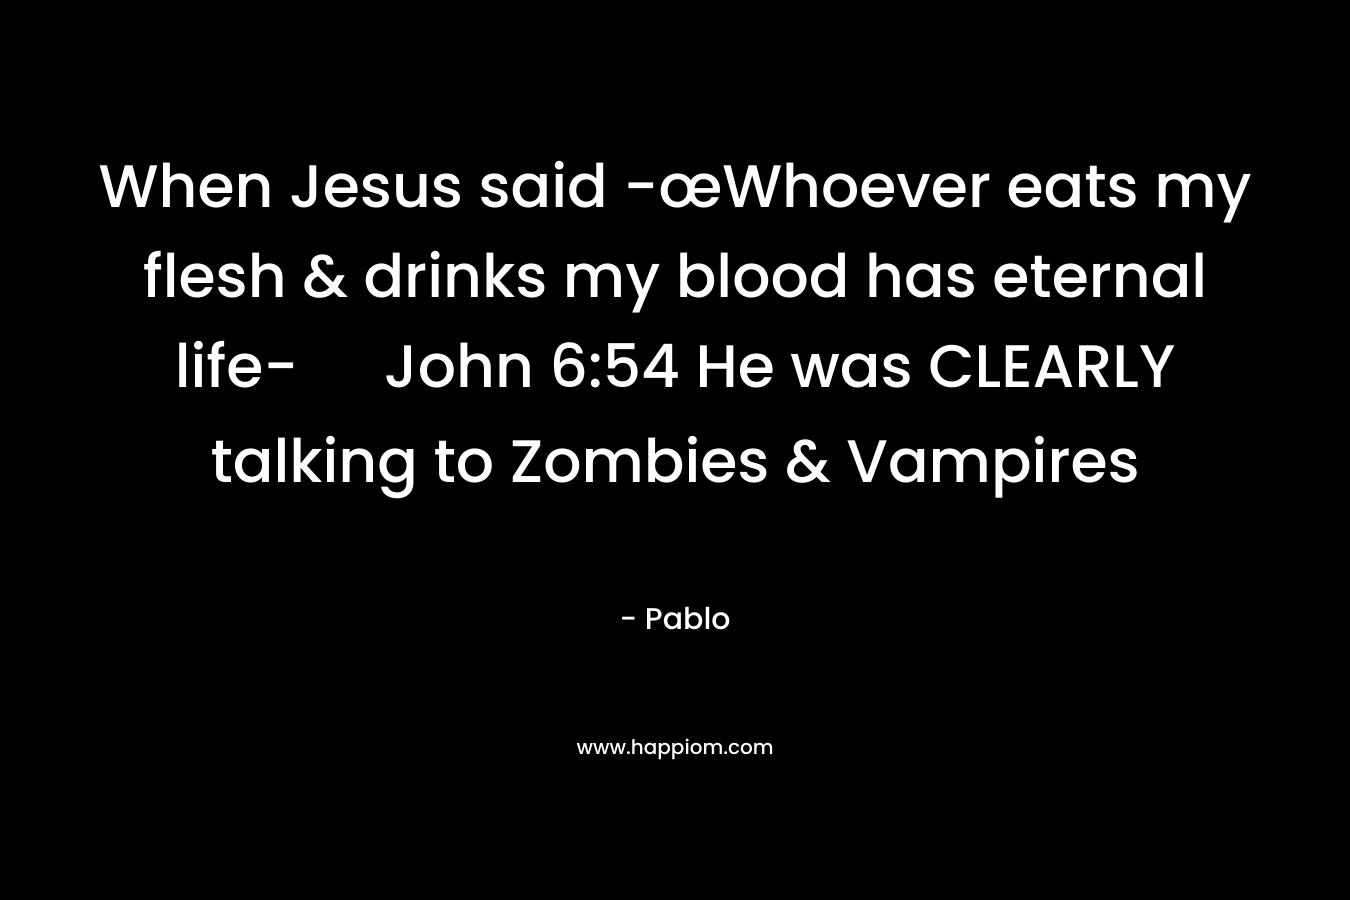 When Jesus said -œWhoever eats my flesh & drinks my blood has eternal life- John 6:54 He was CLEARLY talking to Zombies & Vampires